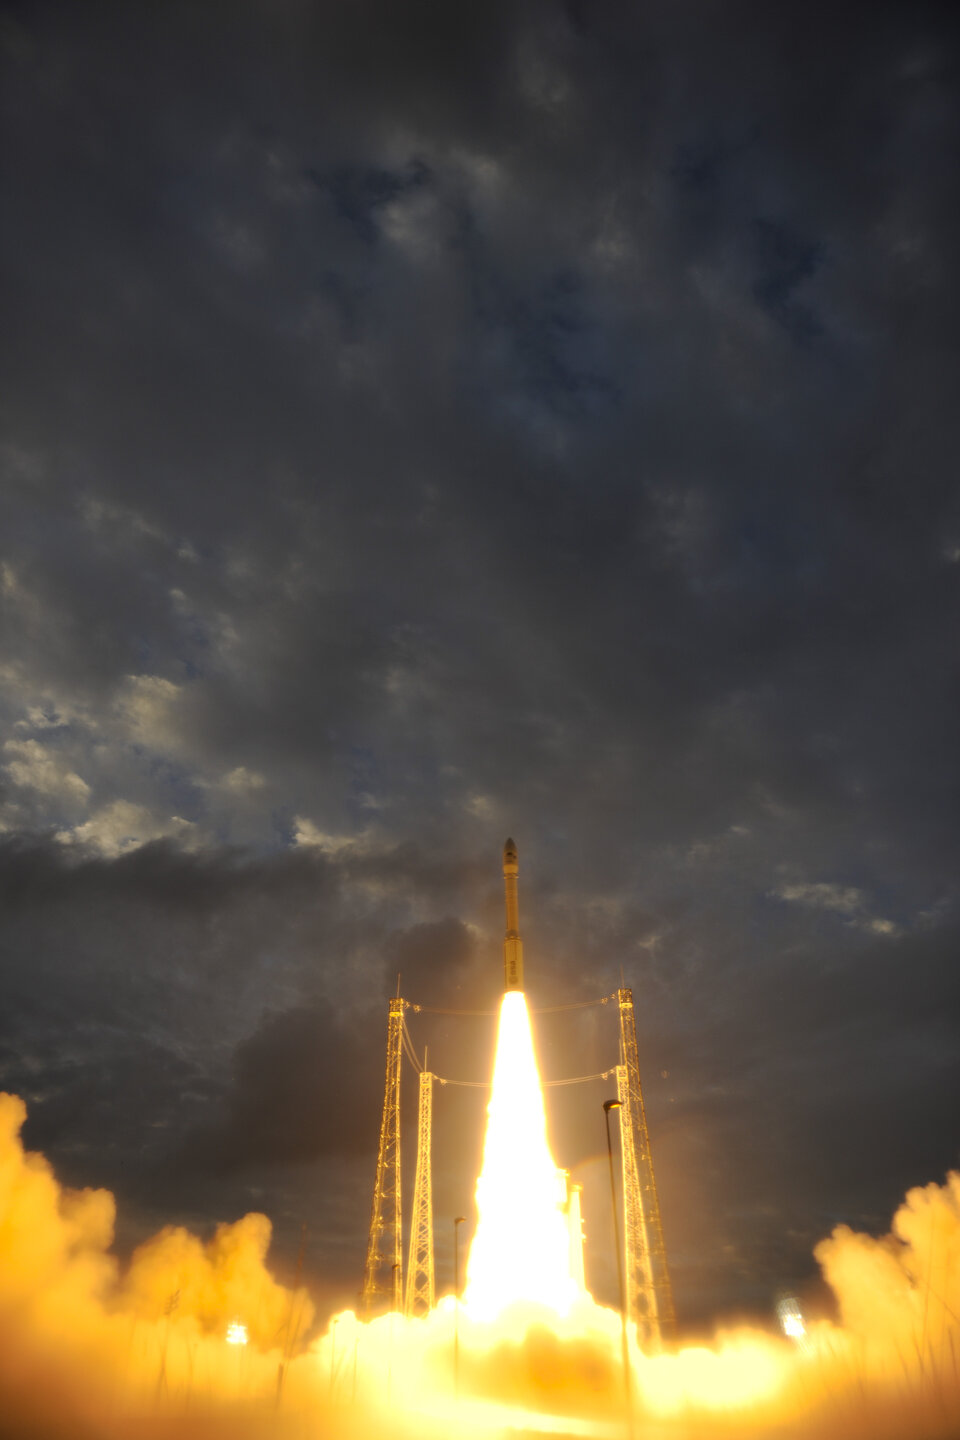 Vega's first launch on 13 February